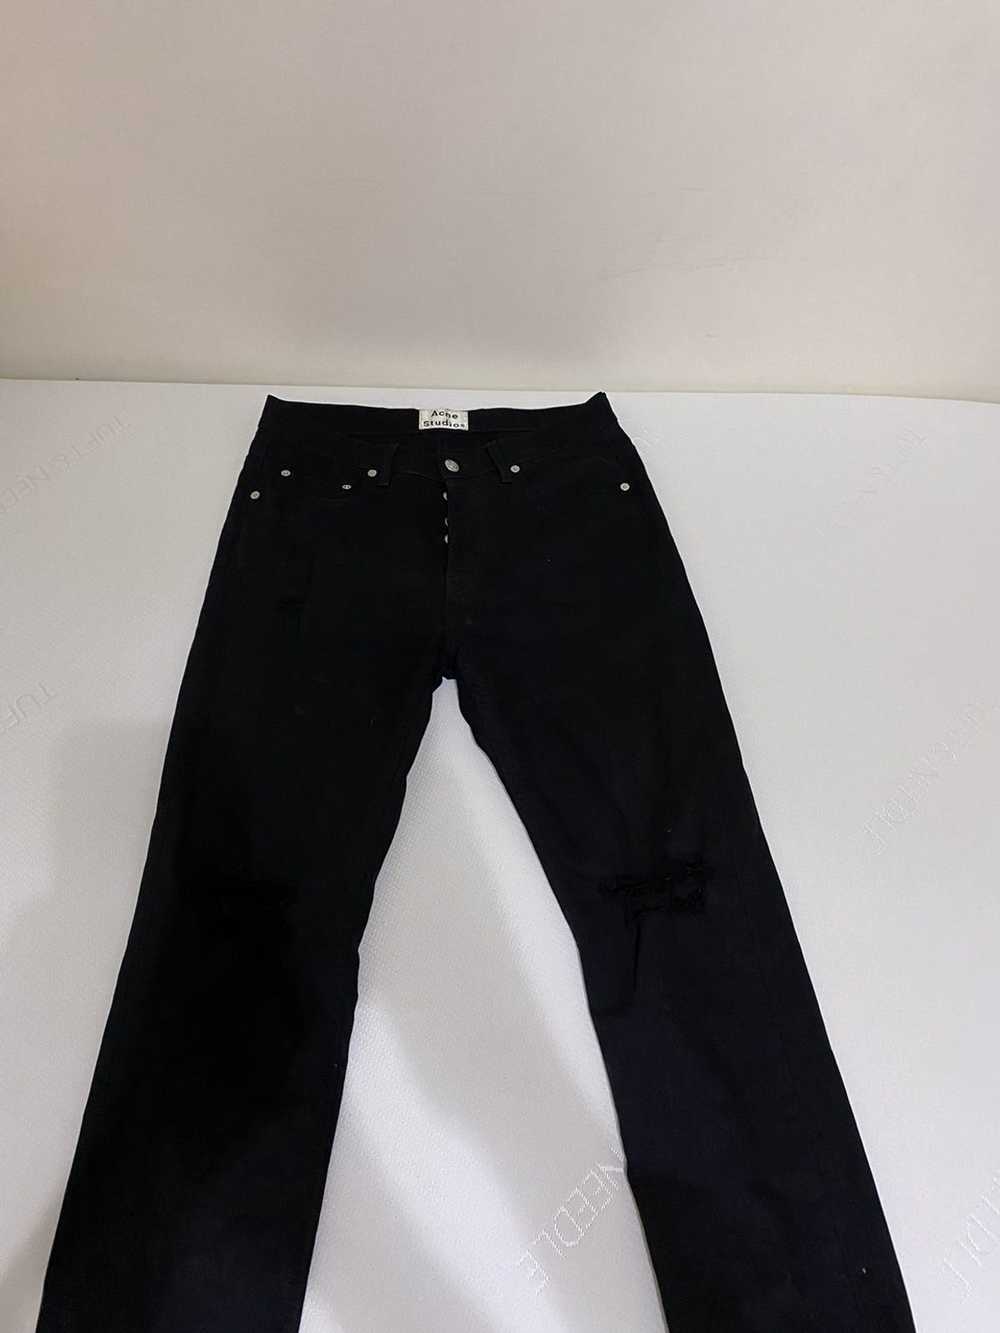 Acne Studios acne town jeans black fray cw - image 2